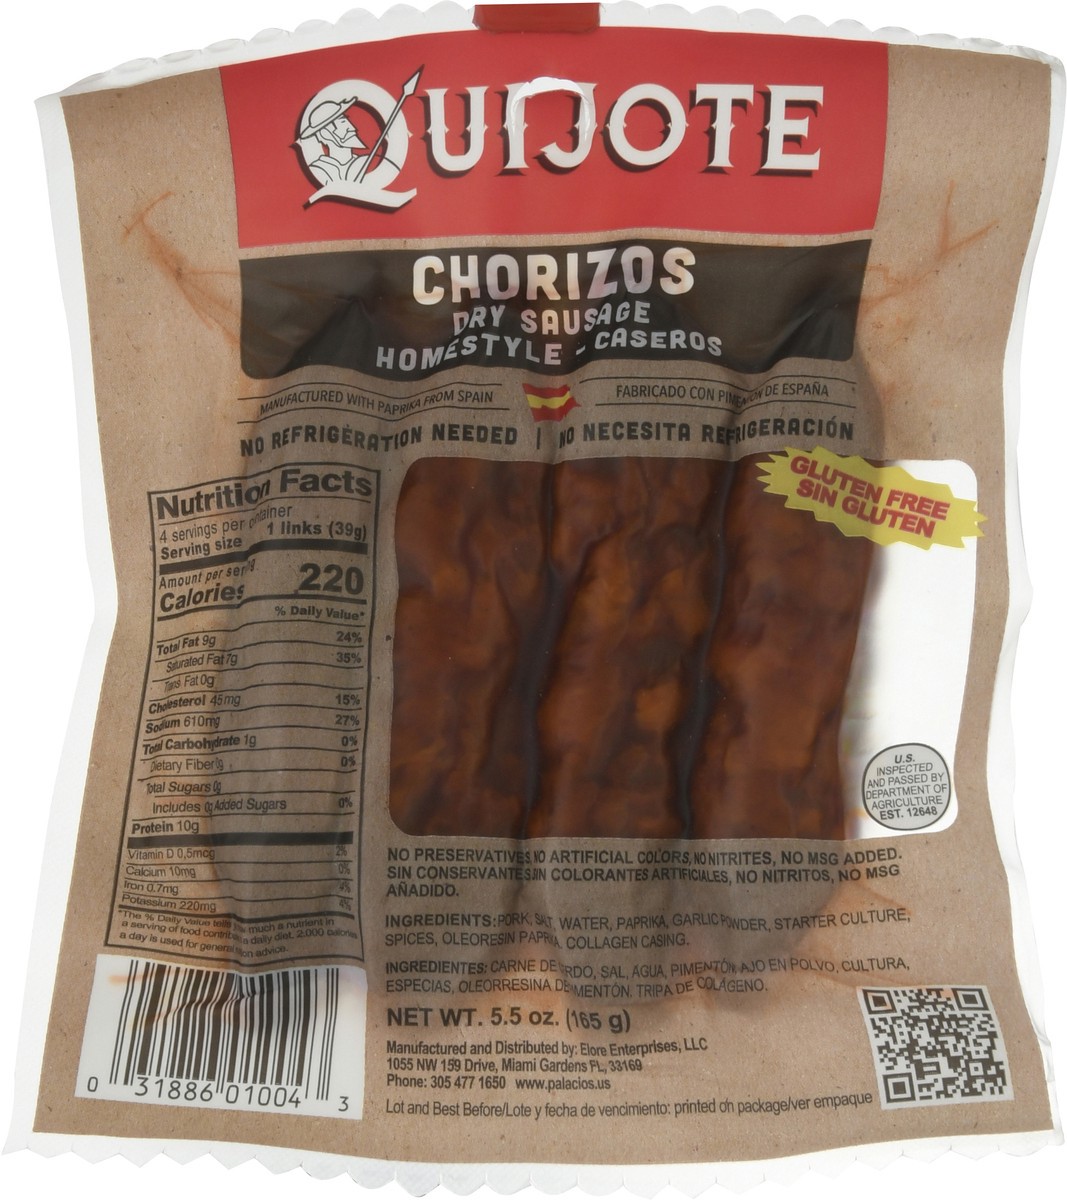 slide 11 of 12, Quijote Chorizos Caseros (Homestyle Dried Sausage) 4-Pack, 5.5 oz